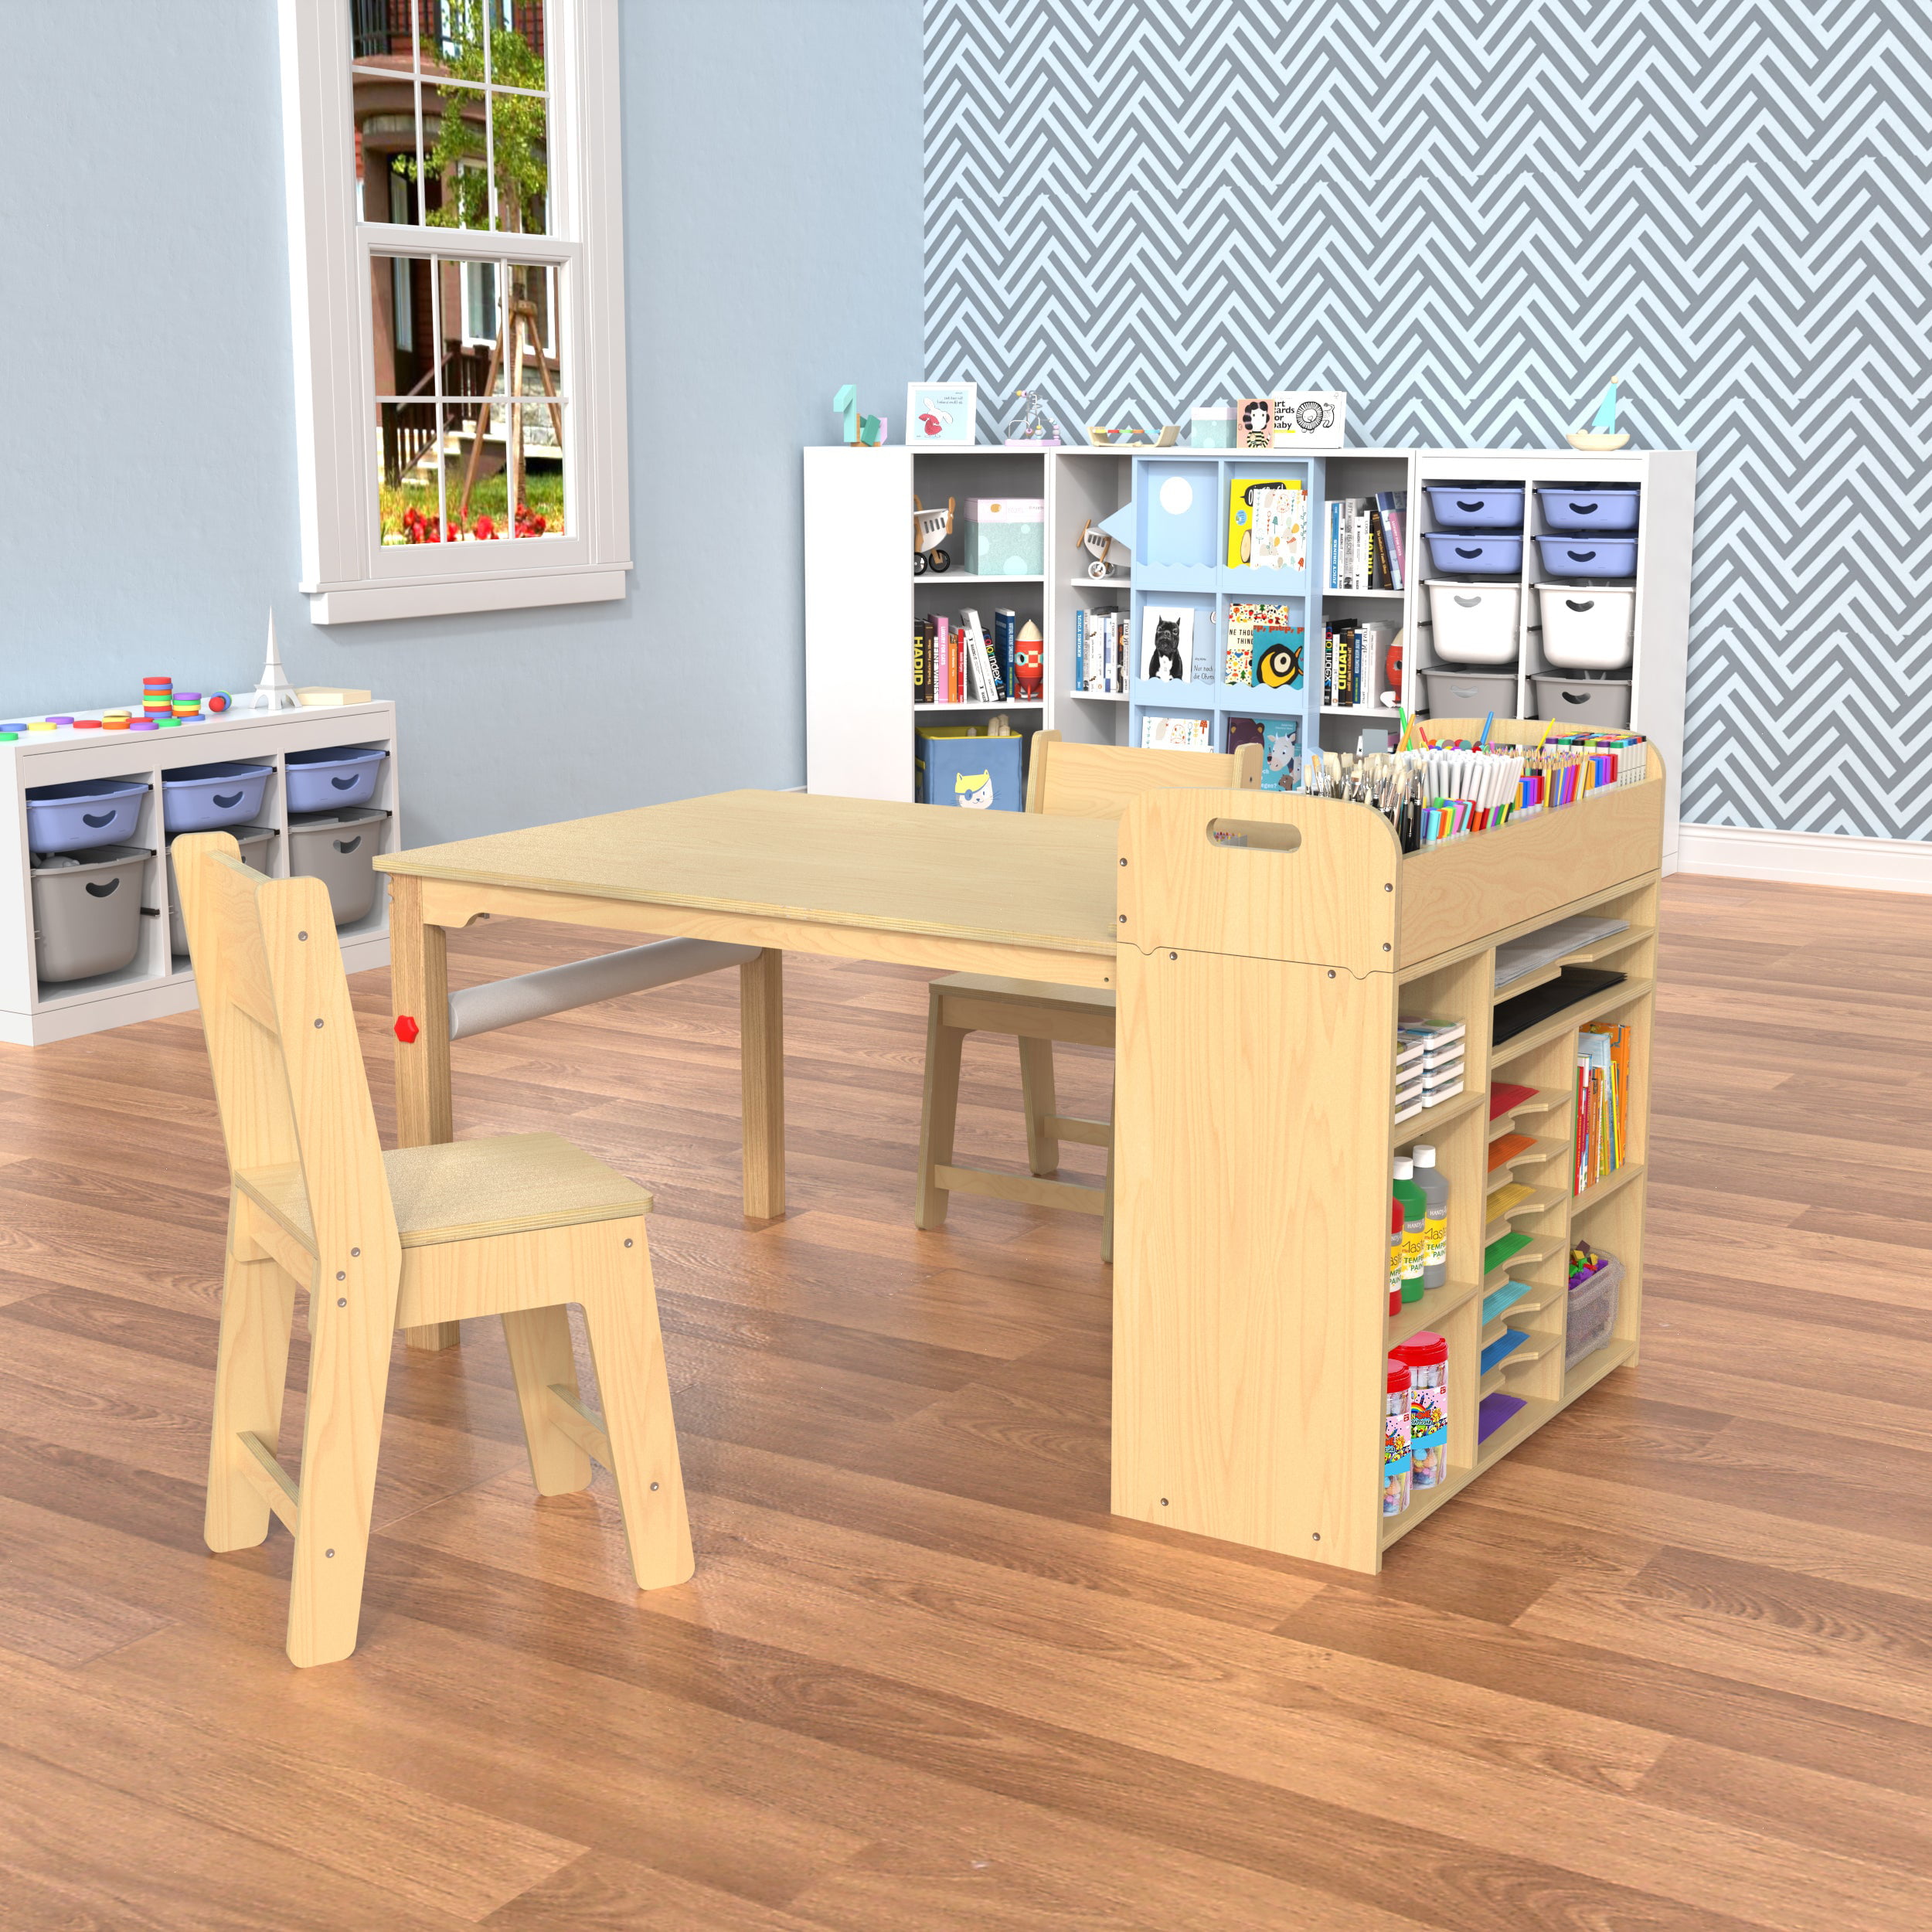  Simplay3 Creative Kids Art Desk Table and Chair Set with  Attached Desk Chair, Full Floor and Art Storage : Home & Kitchen